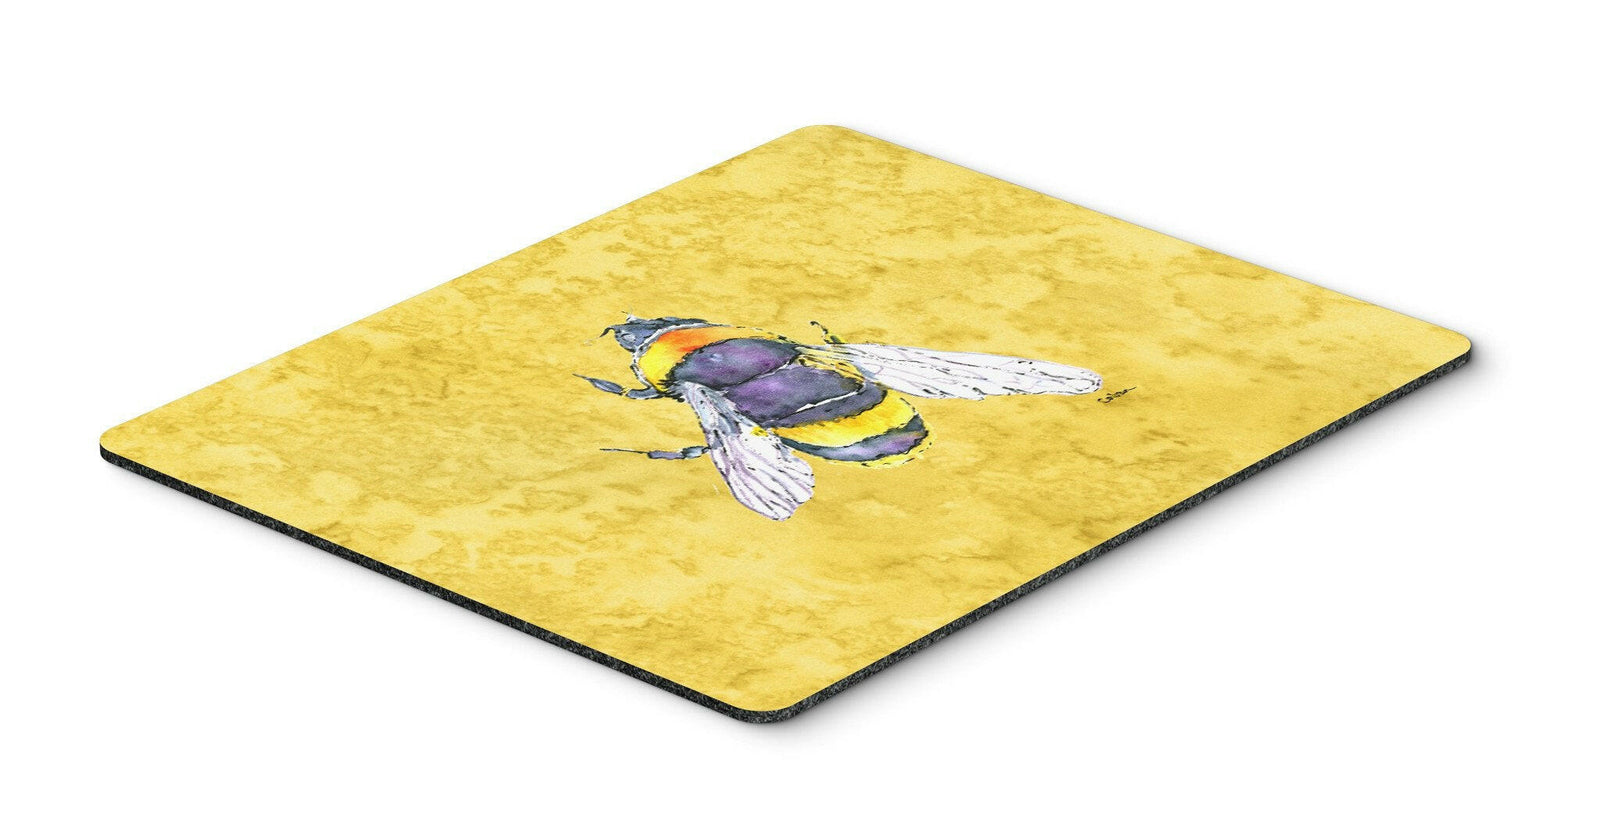 Bee on Yellow Mouse Pad, Hot Pad or Trivet by Caroline's Treasures